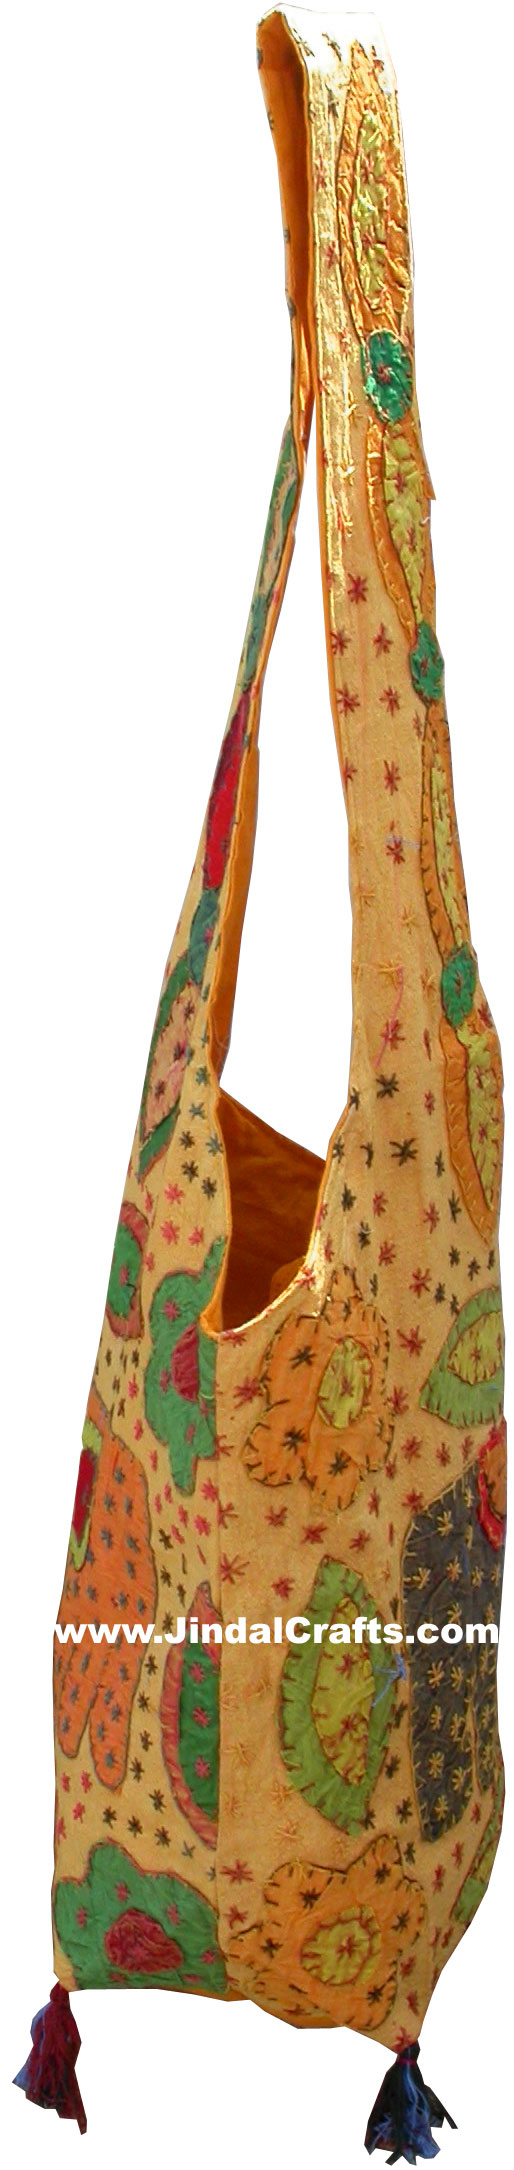 Colourful Hand Embroidered Elephant Handbag from India 100 % Cotton Fabric Art